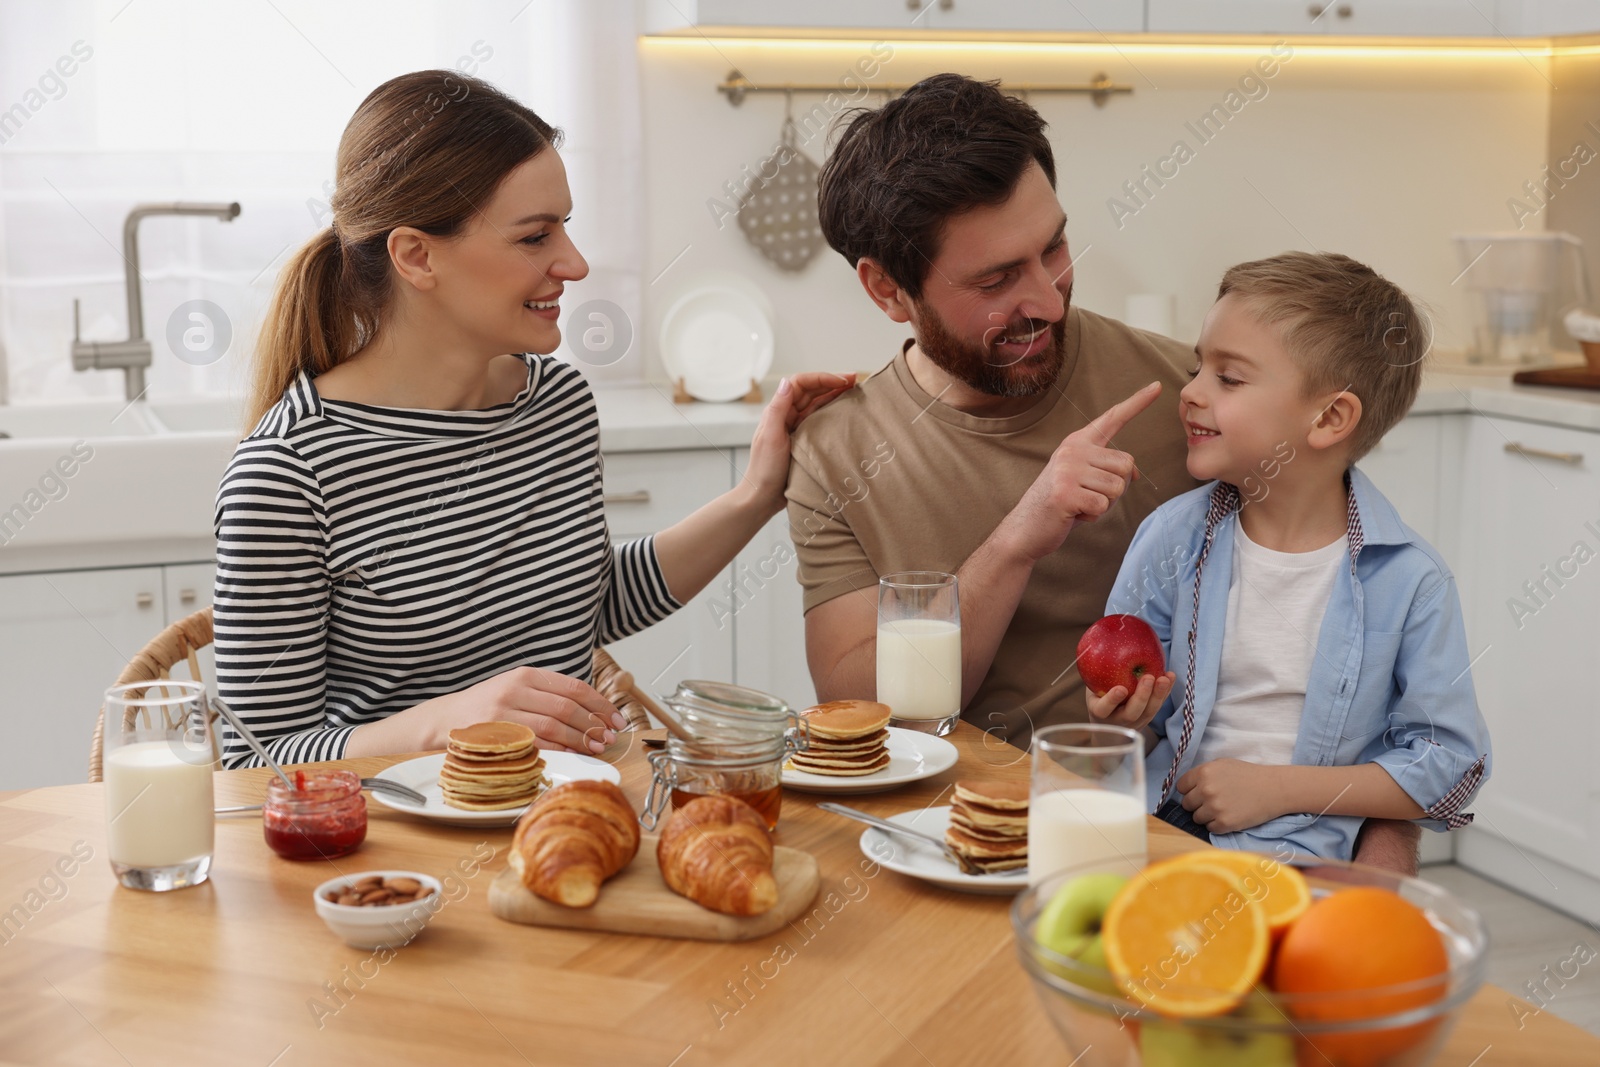 Photo of Happy family having fun during breakfast at table in kitchen